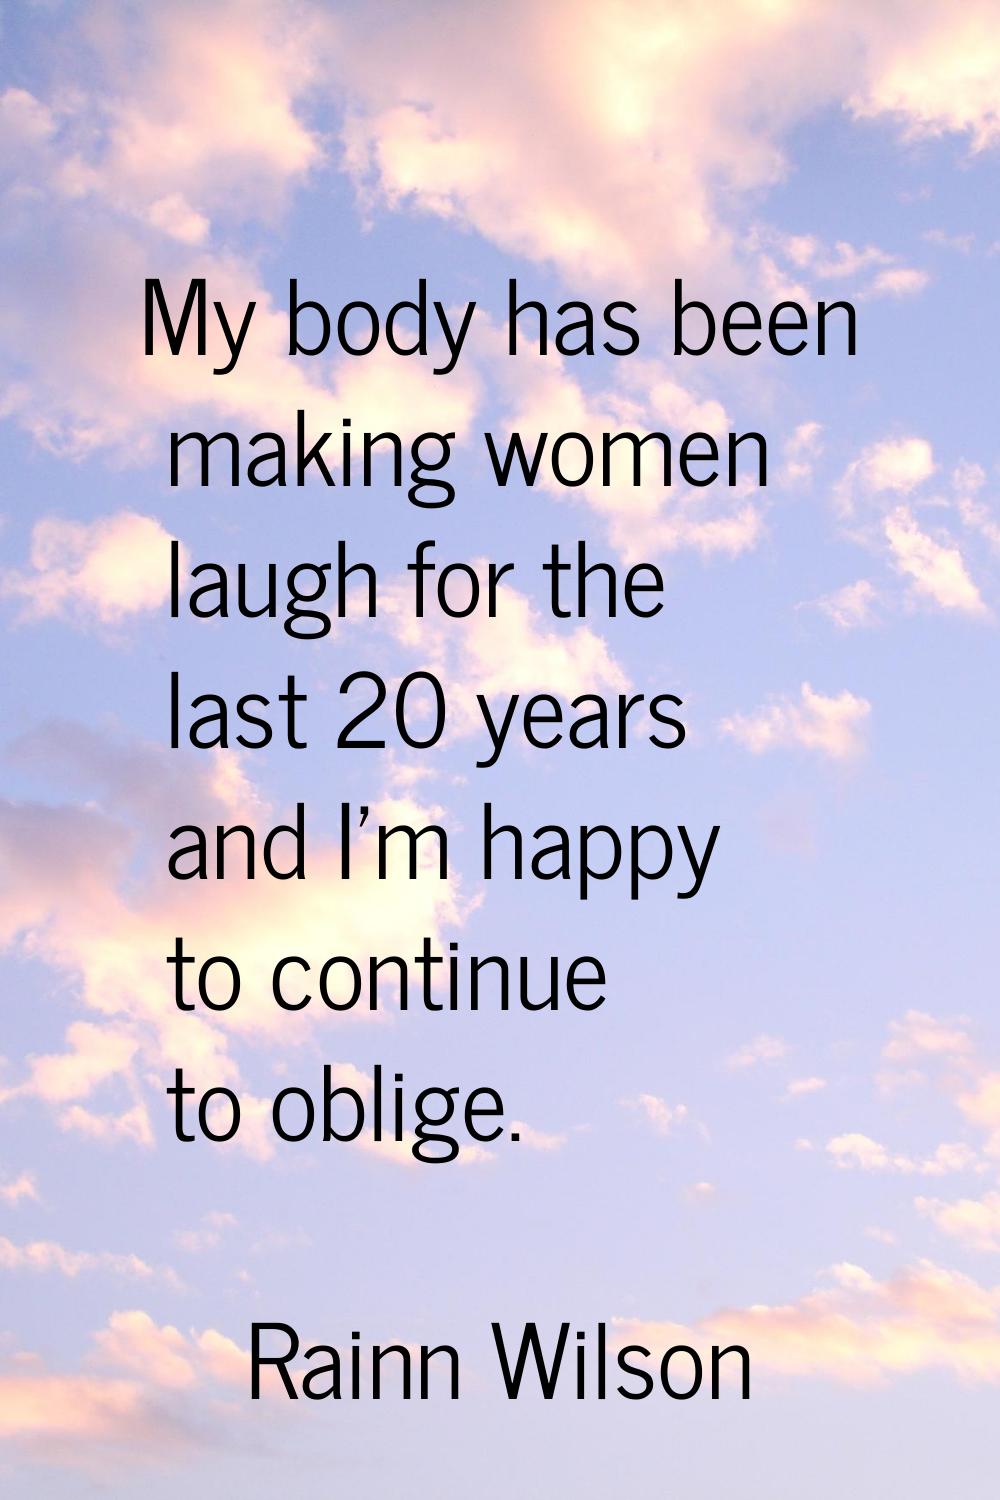 My body has been making women laugh for the last 20 years and I'm happy to continue to oblige.